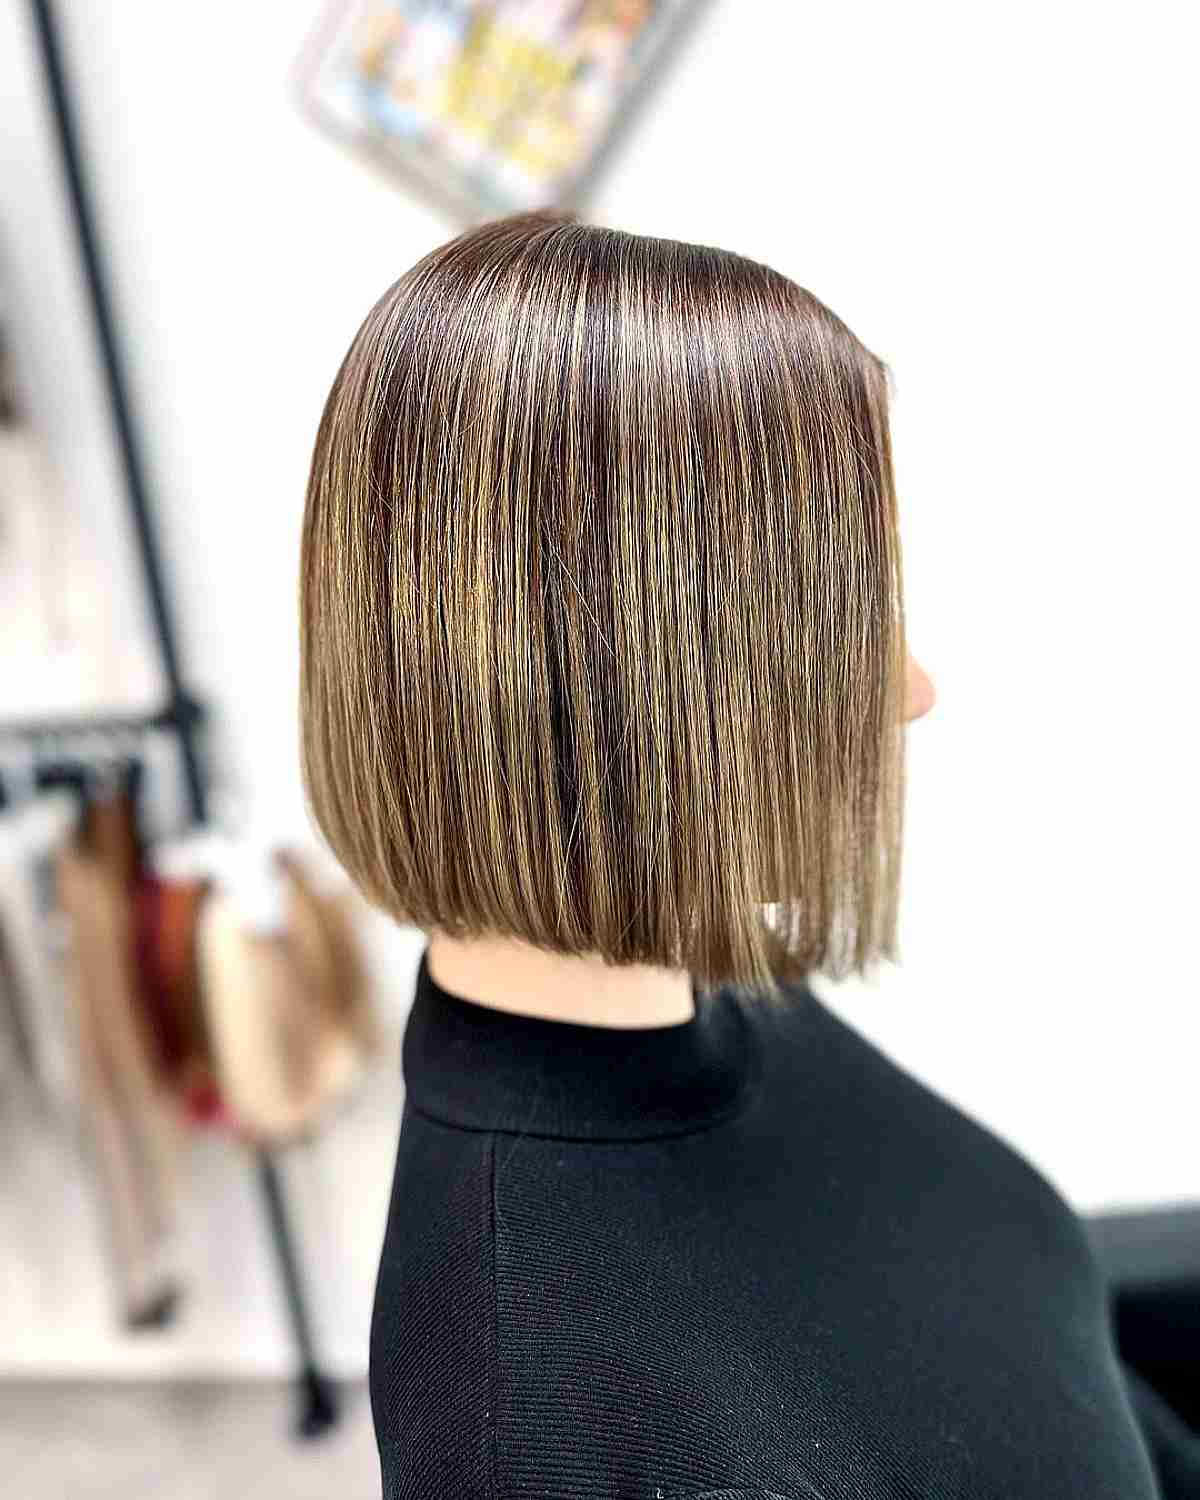 Neck-Length Short Straight Blunt Cut Bob with Babylights